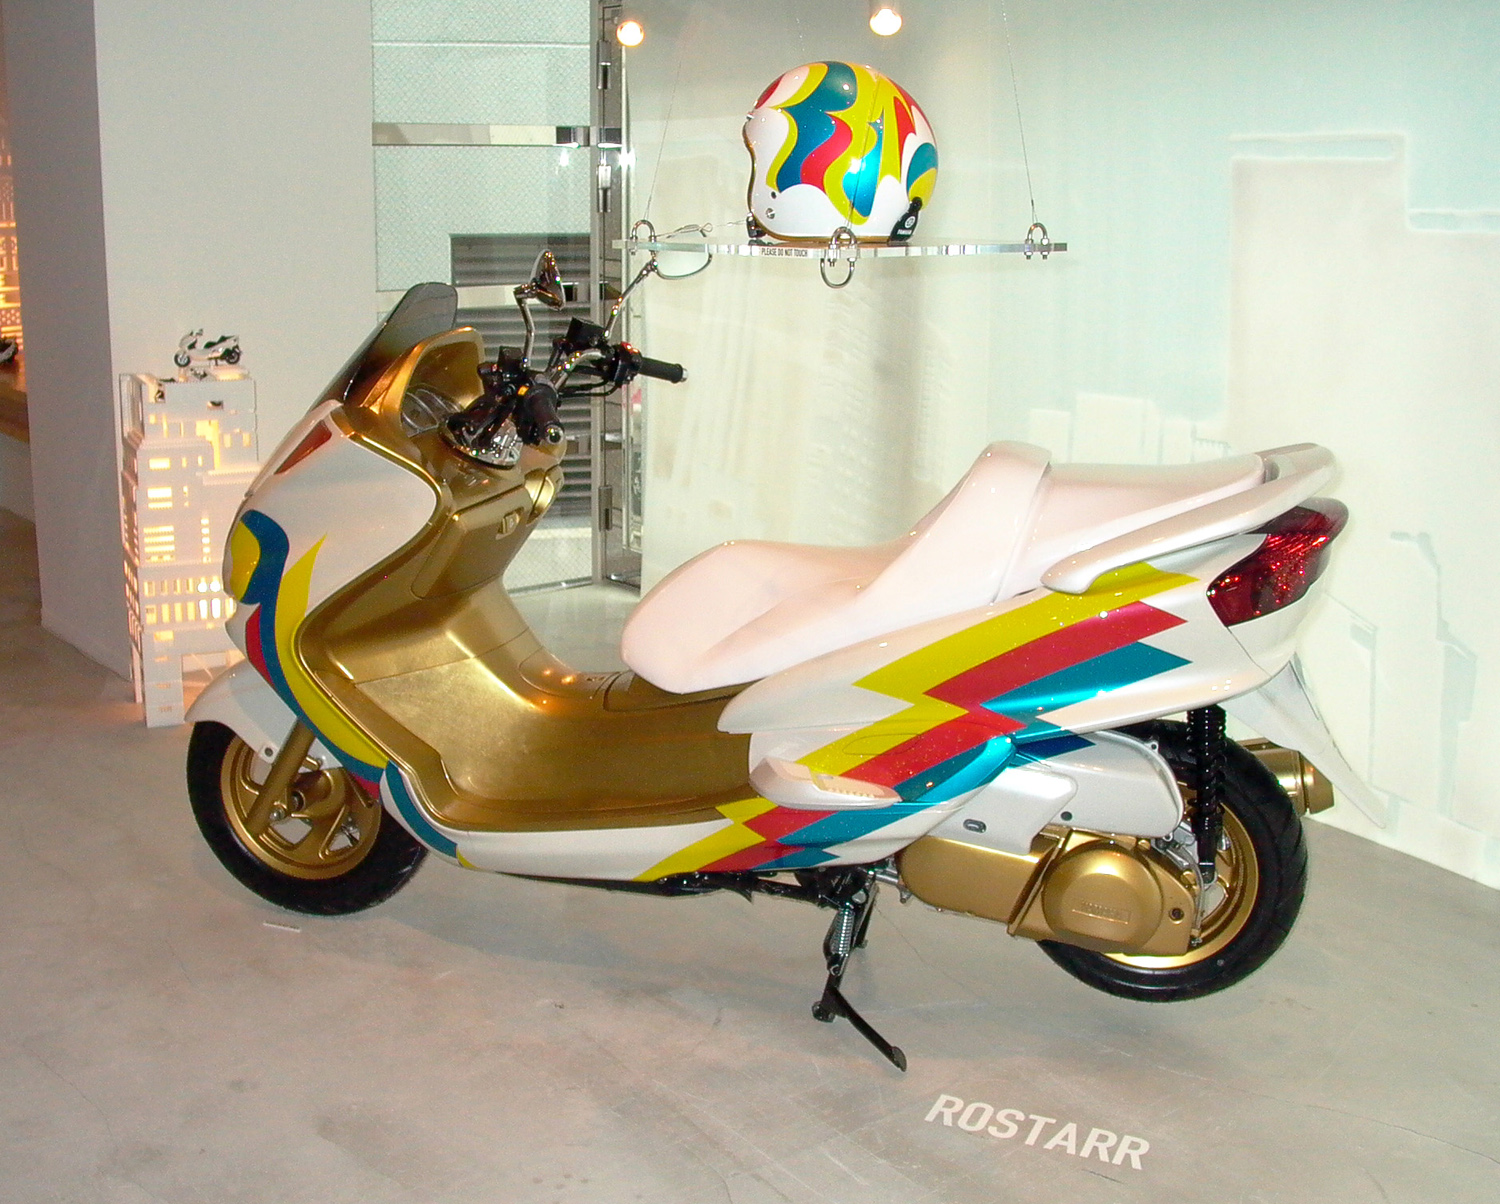  Bosozoku Superstar, 2003 special collaboration with Yamaha dimensions vary 